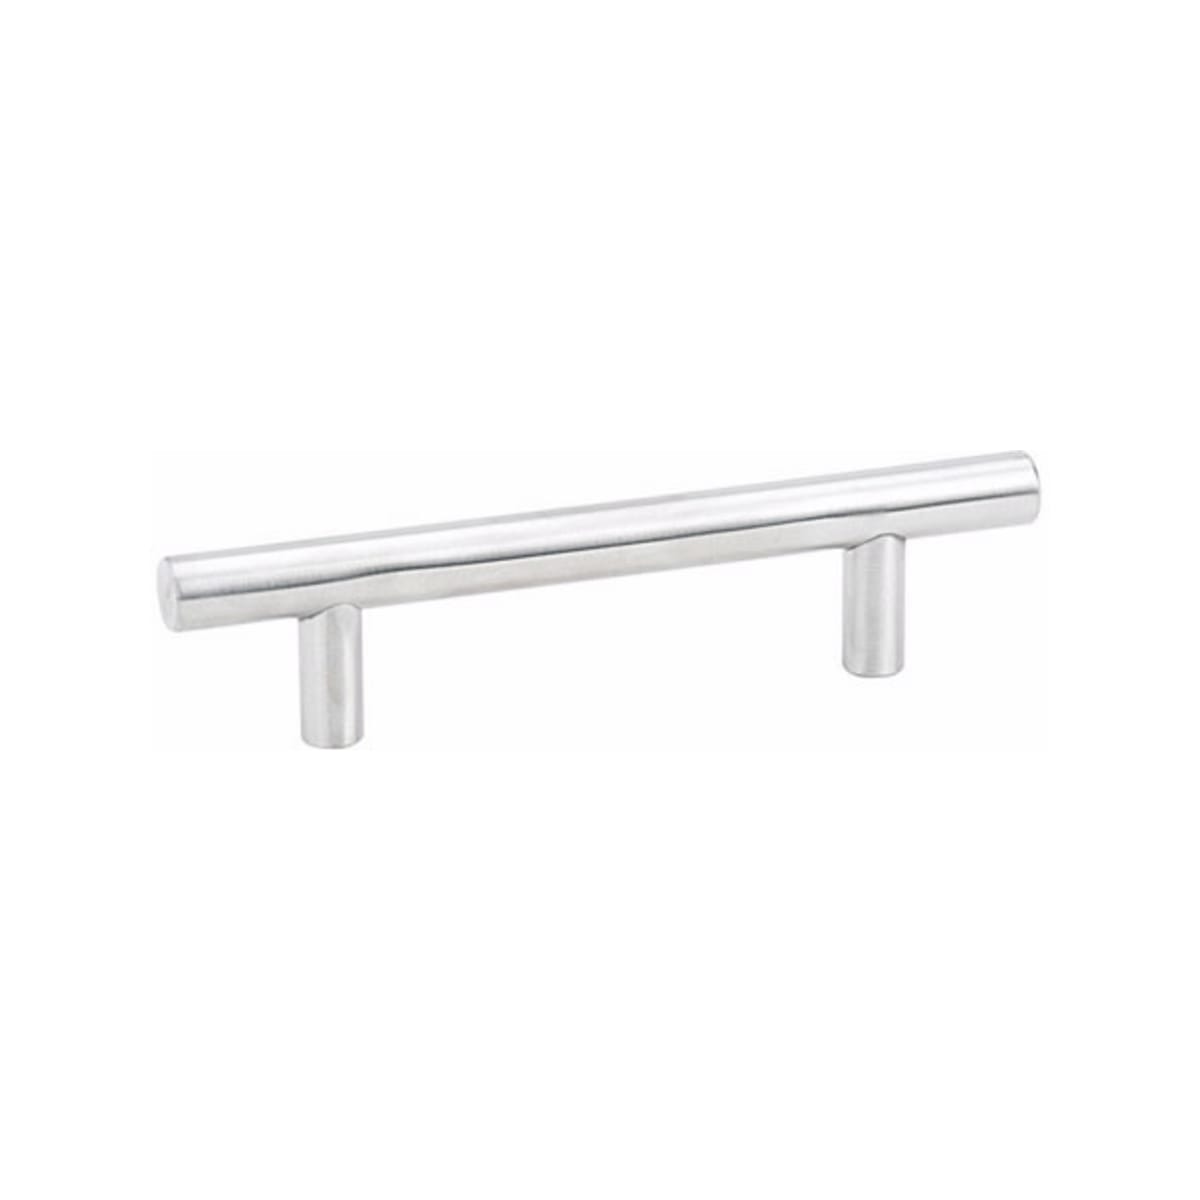 Bar Stainless Steel Cabinet Pull